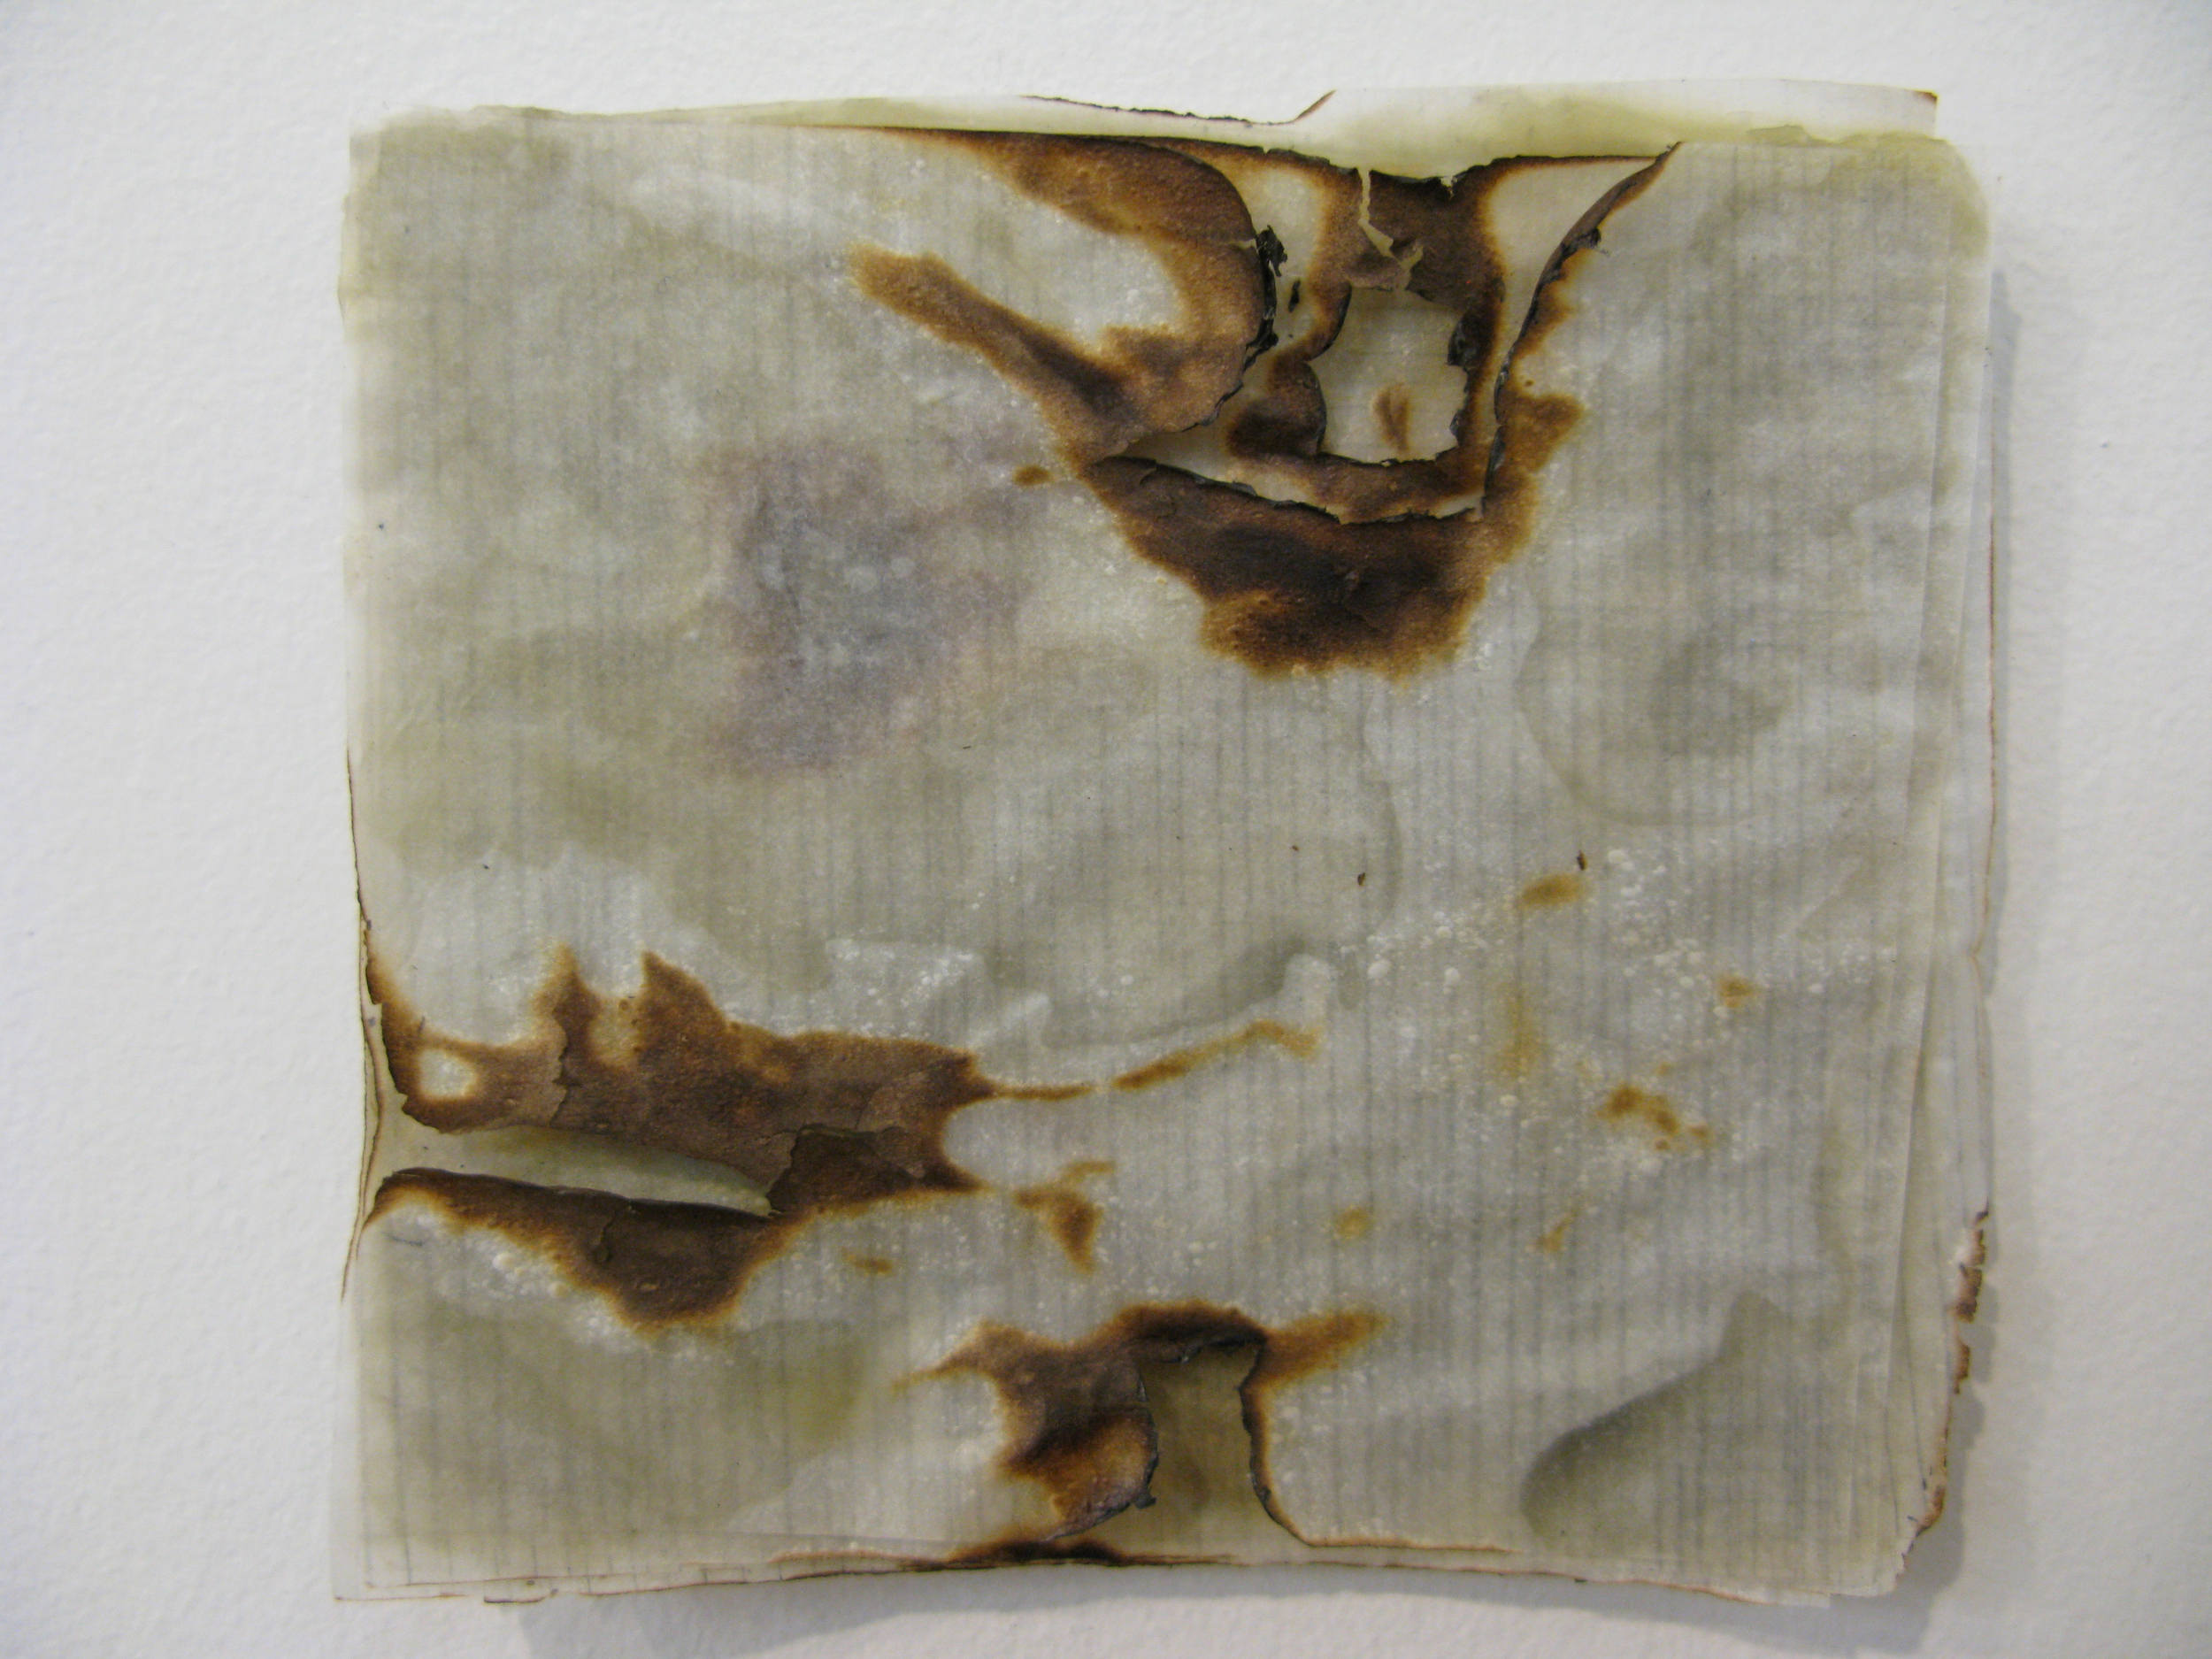  Untitled  layered vellum bonded with beeswax, graphite  4 x 3.5 in.  2012 